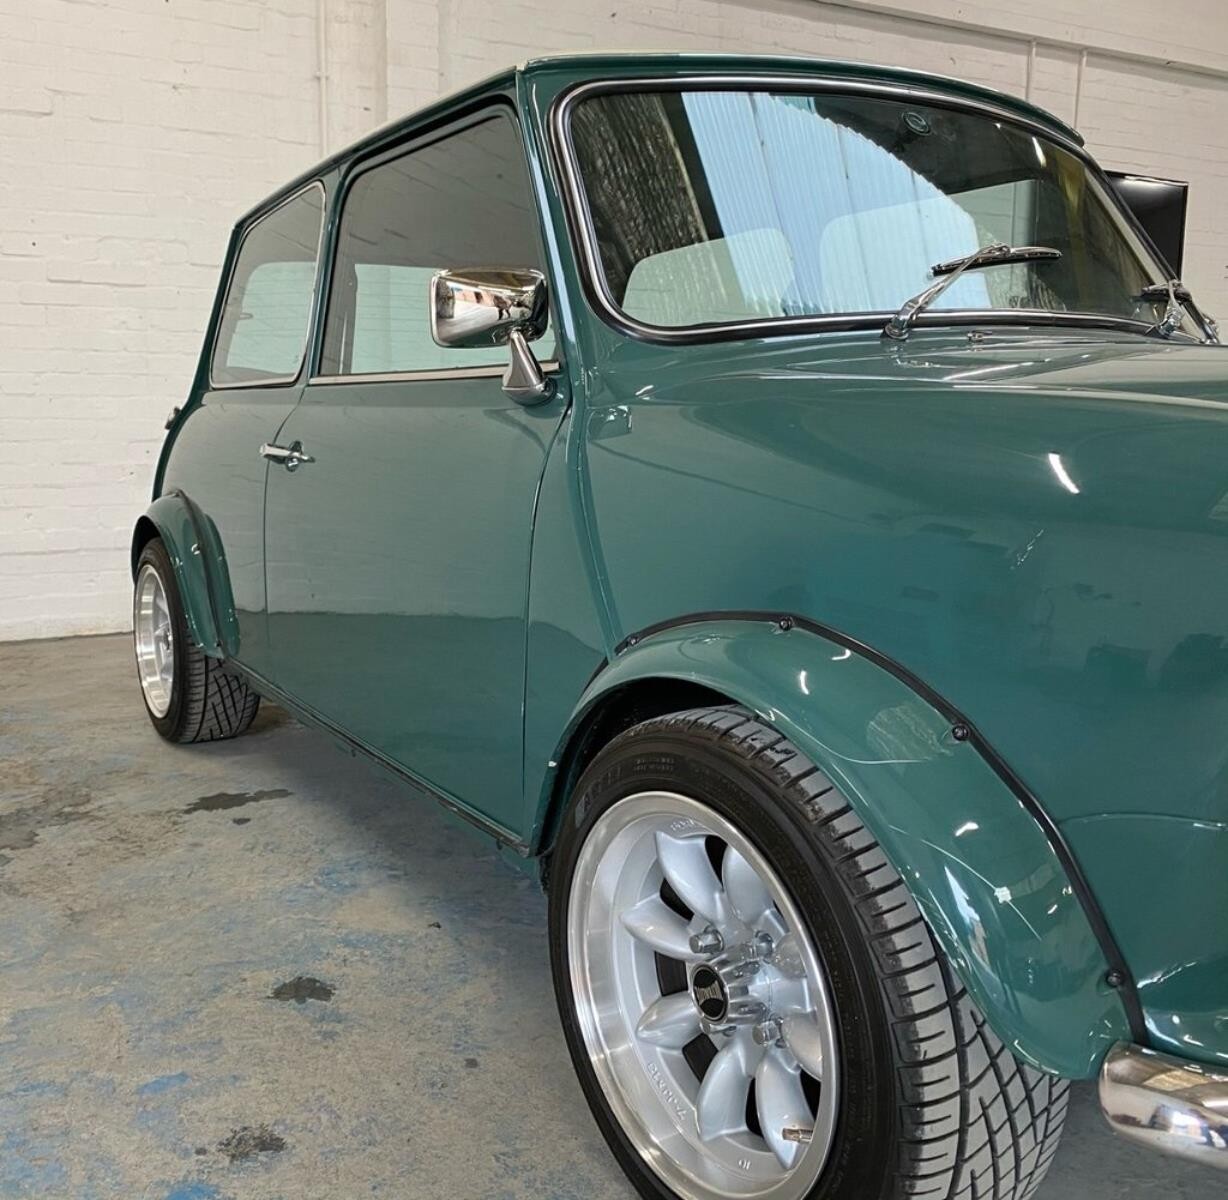 1971 Mini Cooper S Recreation Registration number KFB 656J Green with a white roof Black interior - Image 10 of 23